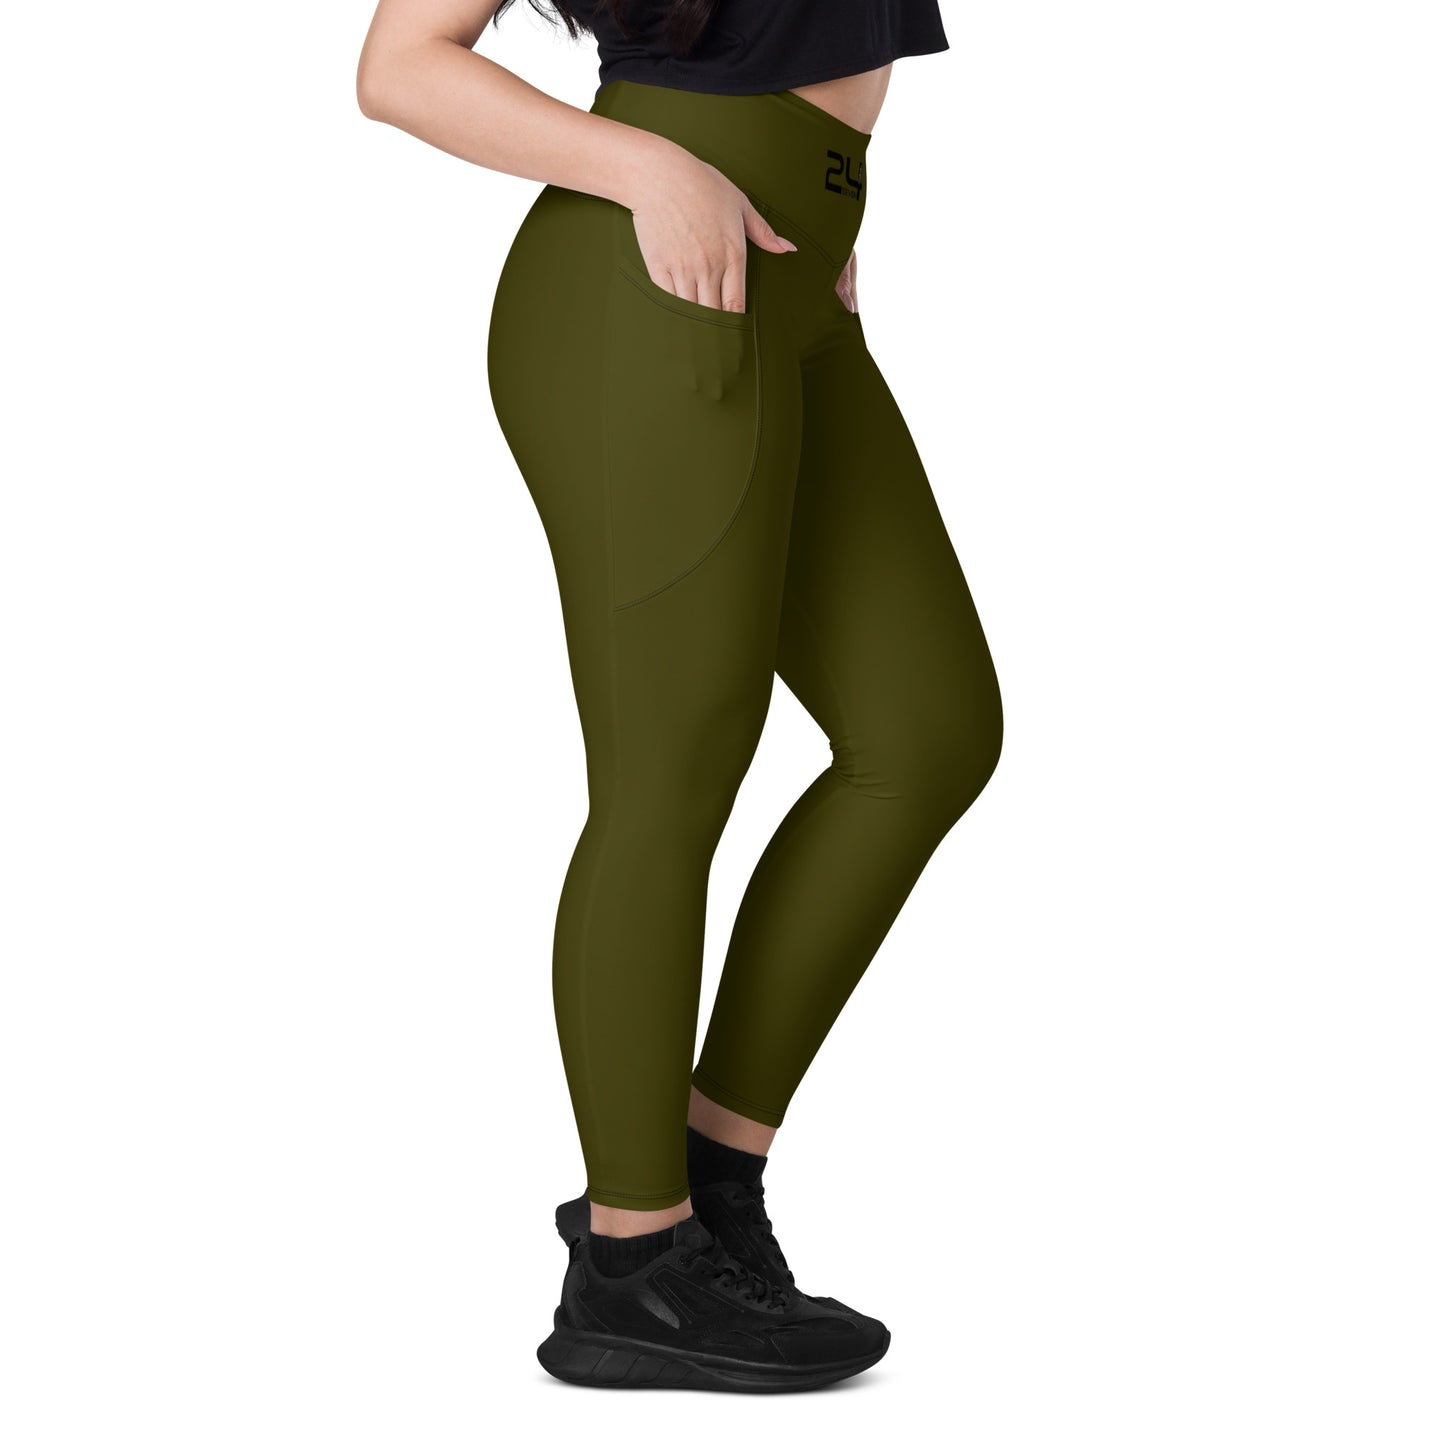 Camo Color Leggings with Pockets